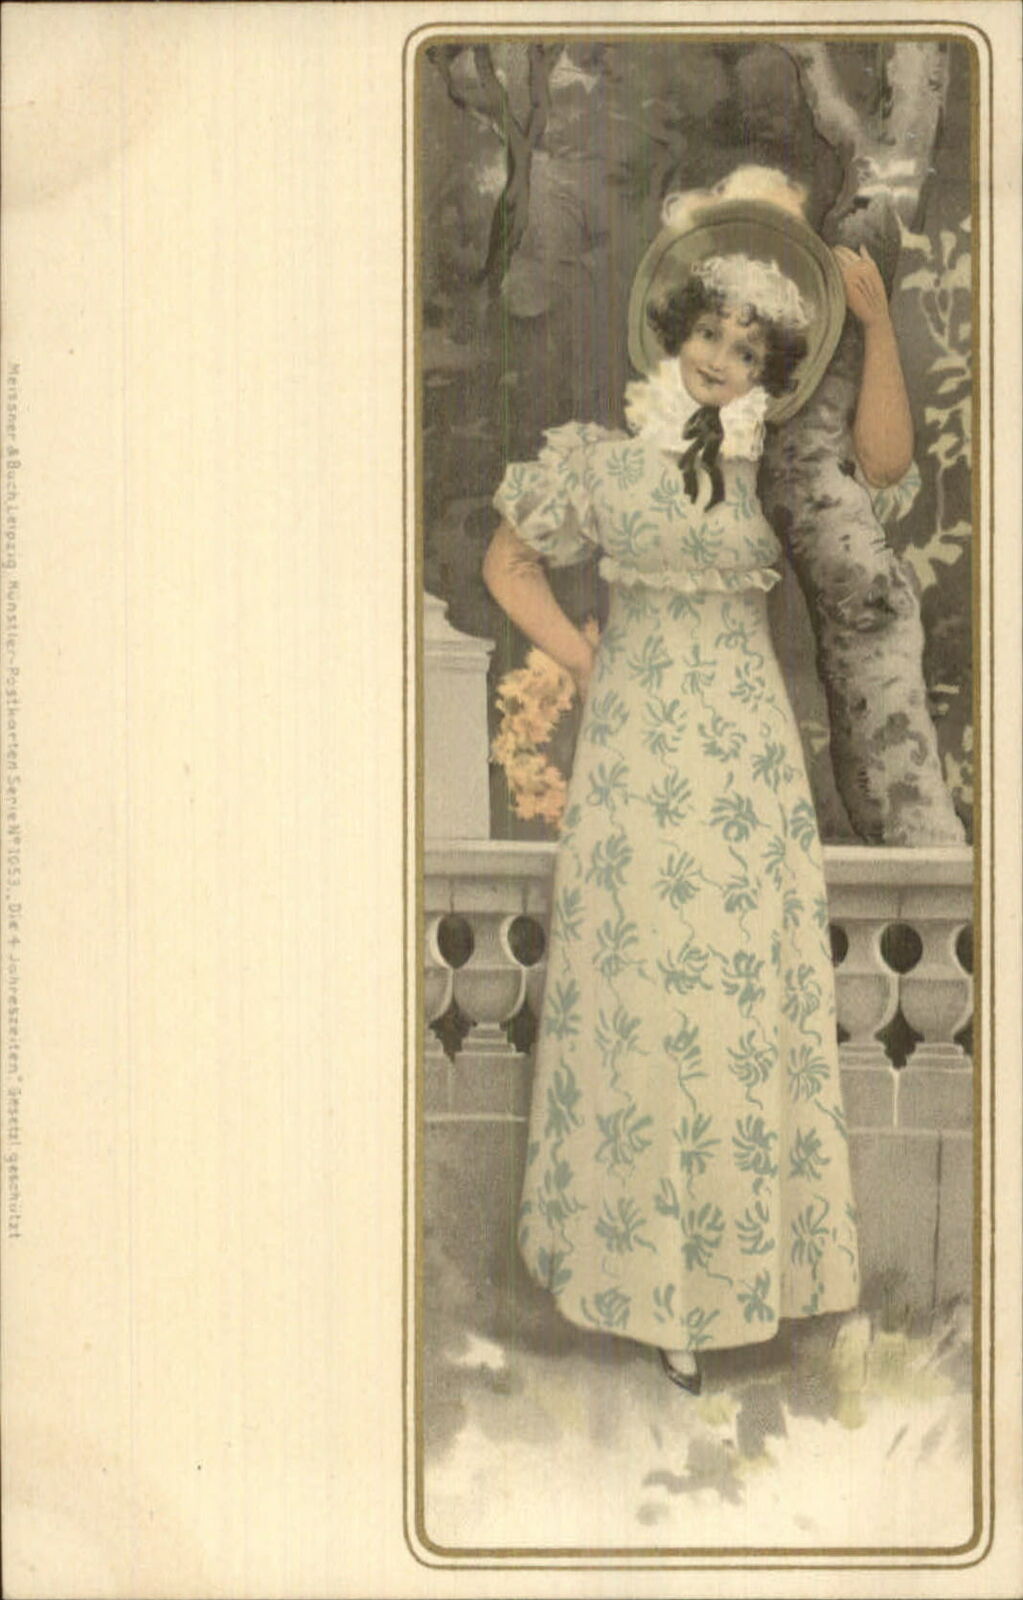 Meissner & Buch - Pretty Woman Long Patterned Dress Lithograph Postcard c1905